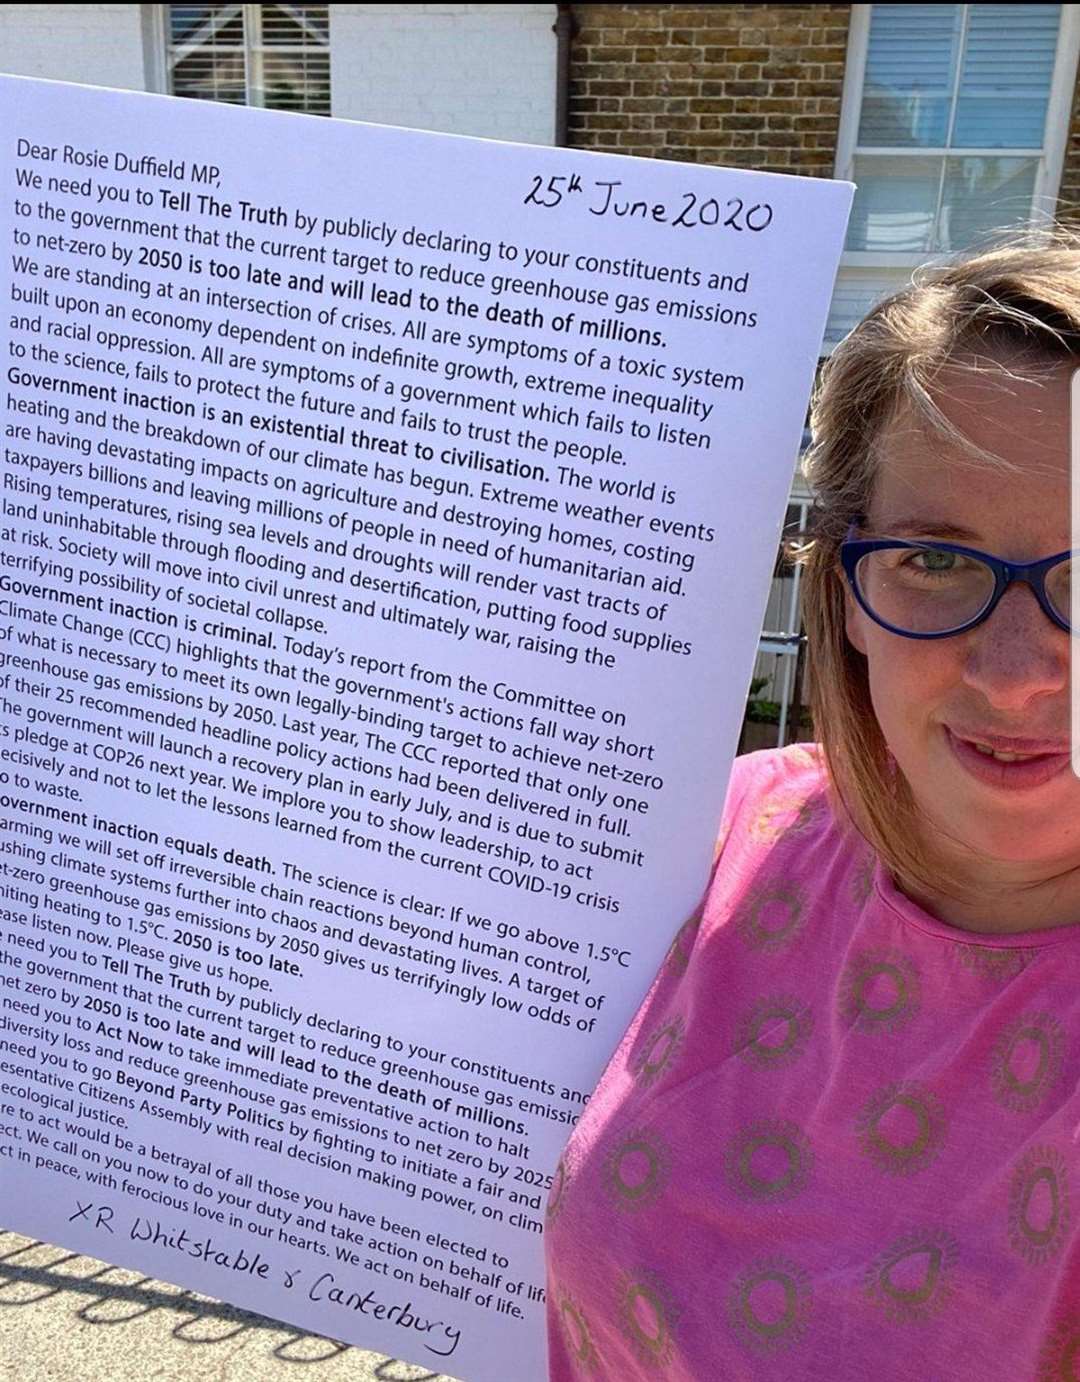 Charlotte Cornell receives the letter from Whitstable XR. Picture: Rosie Duffield / Twitter